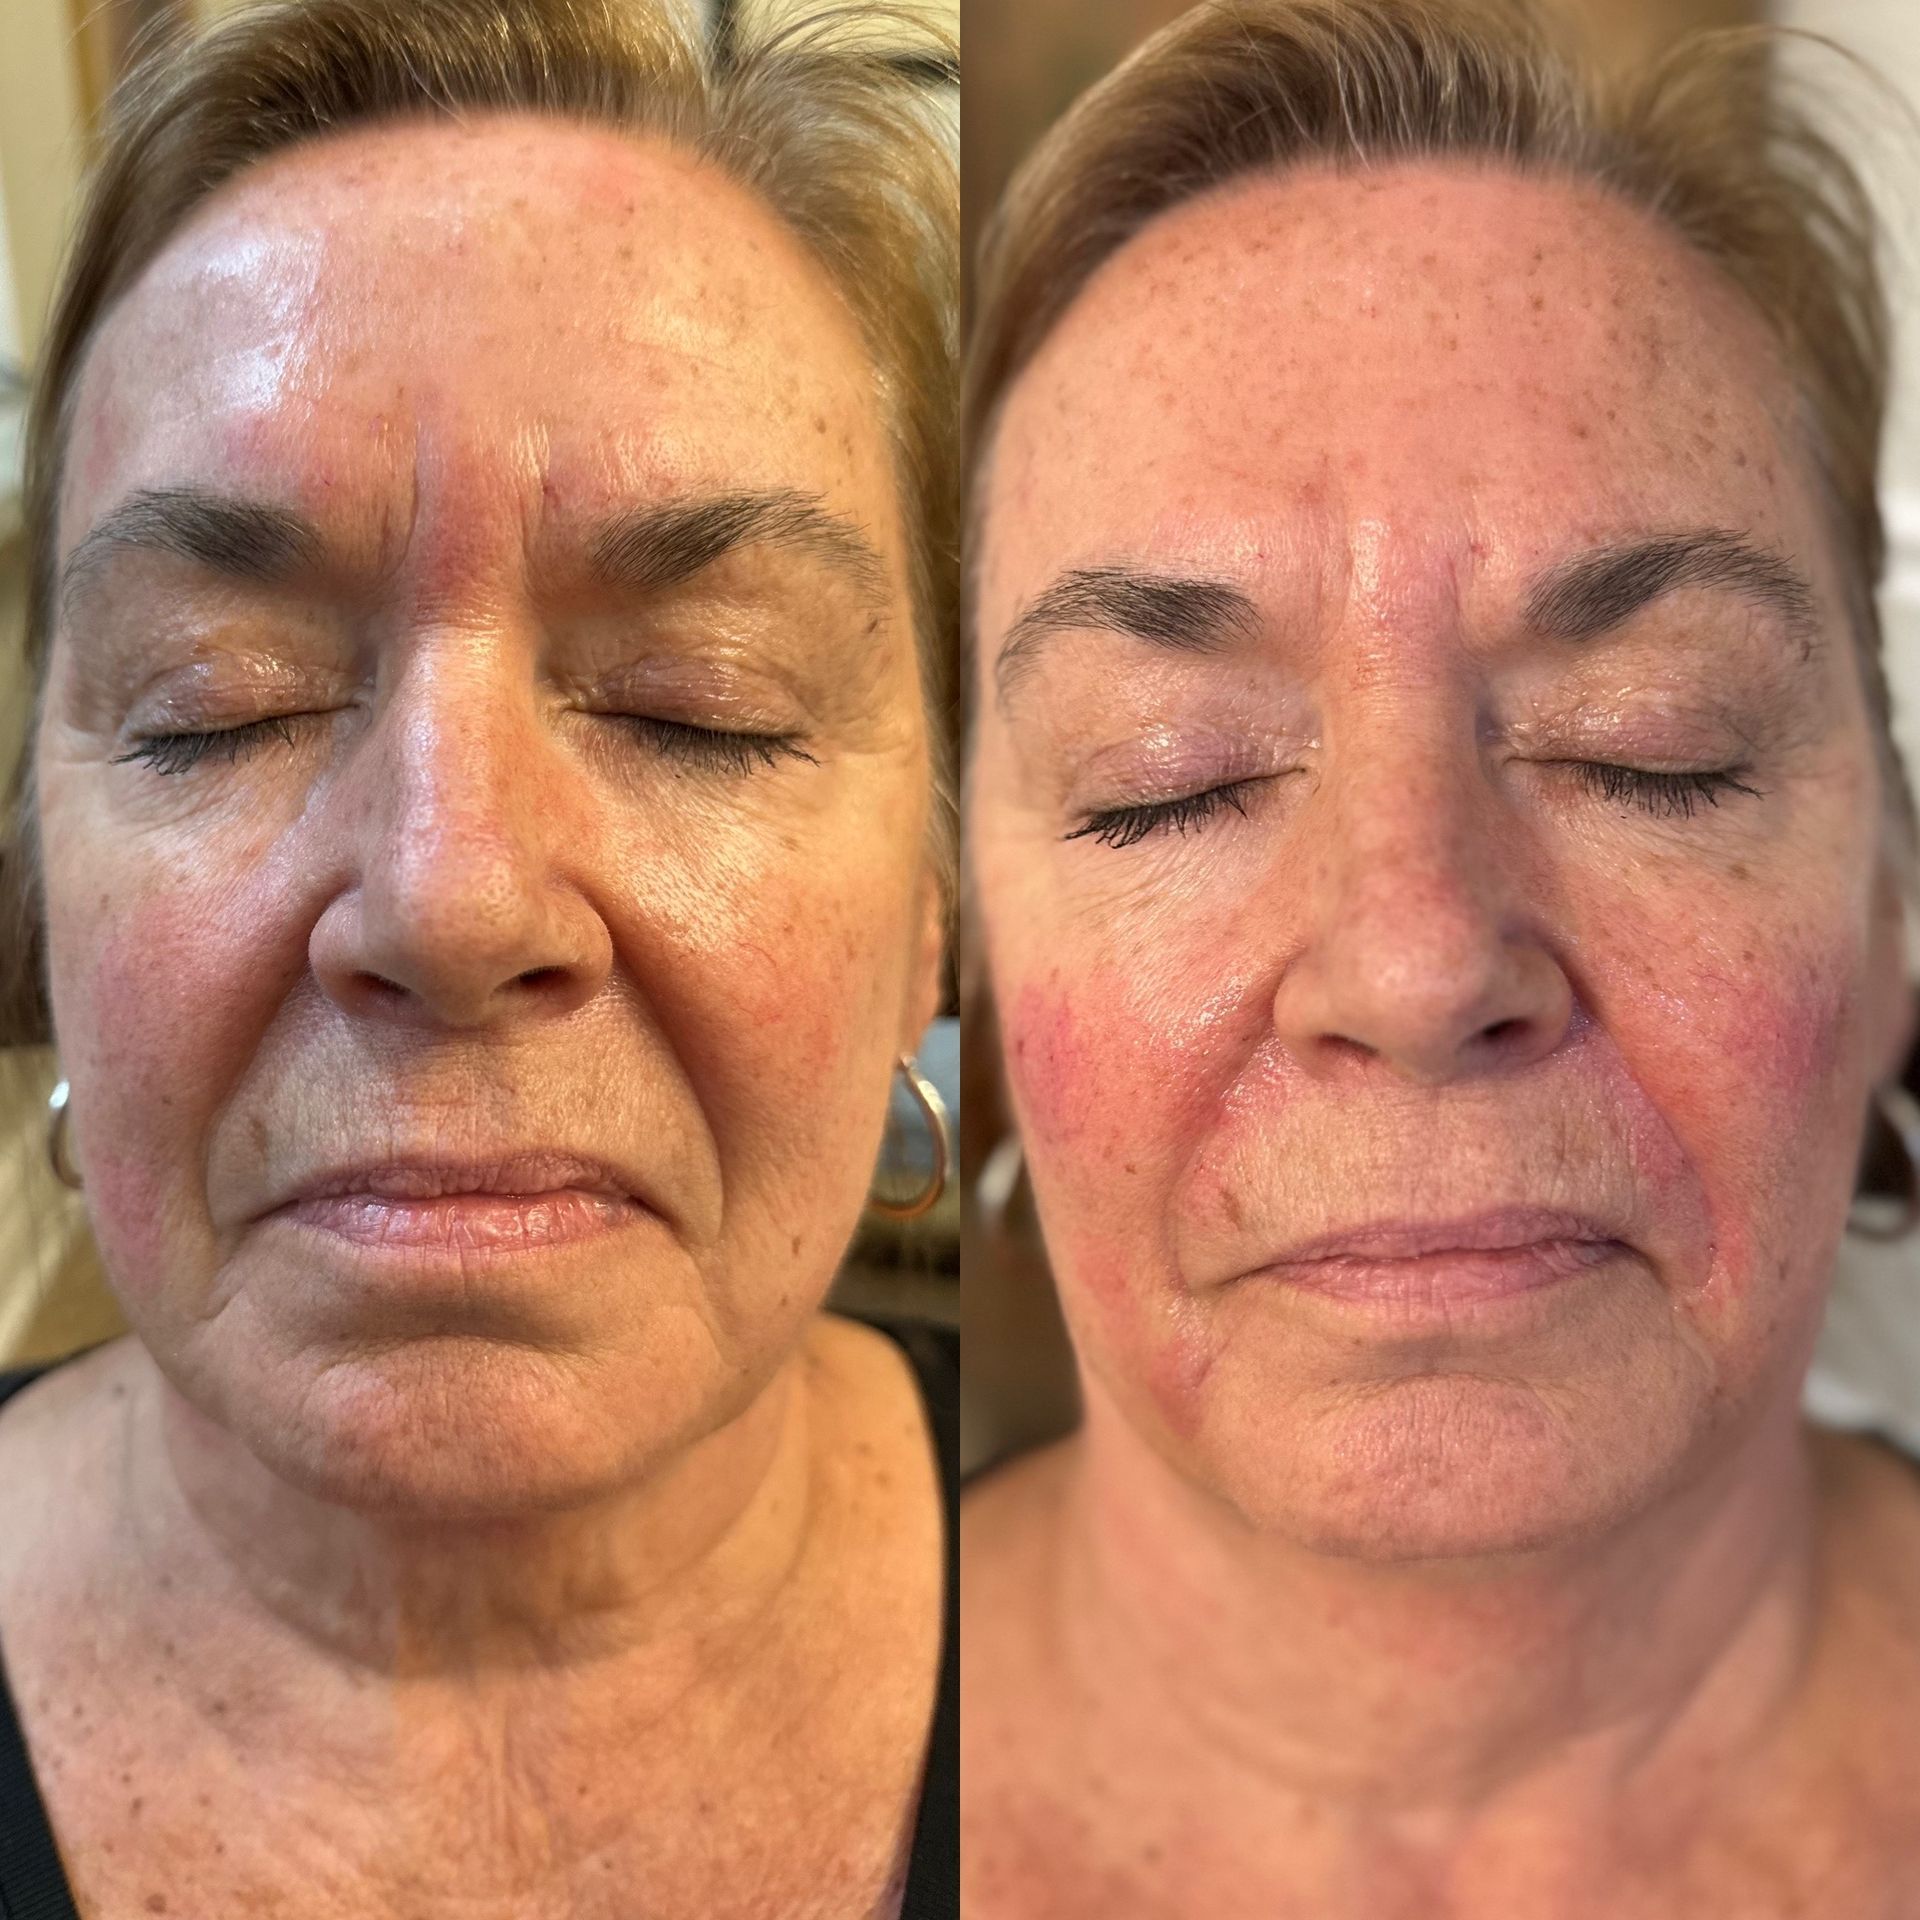 Nasolabial folds filler treatment before and after results